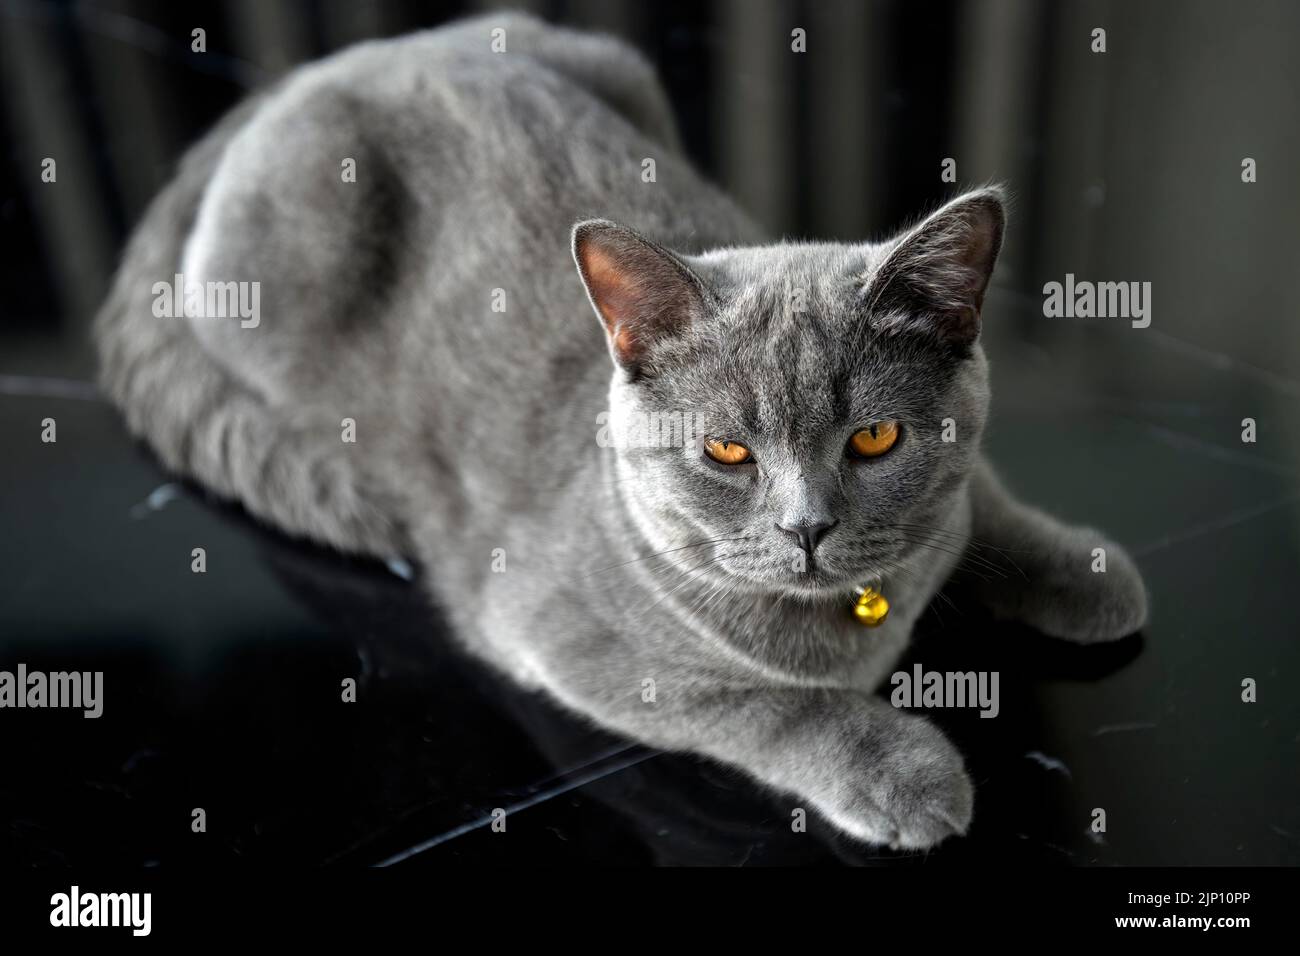 Kitten relaxing on a black coffee table Annoyed and annoyed, looking very funny and cute. A blue-eyed British Shorthair cat with orange eyes, crouchin Stock Photo